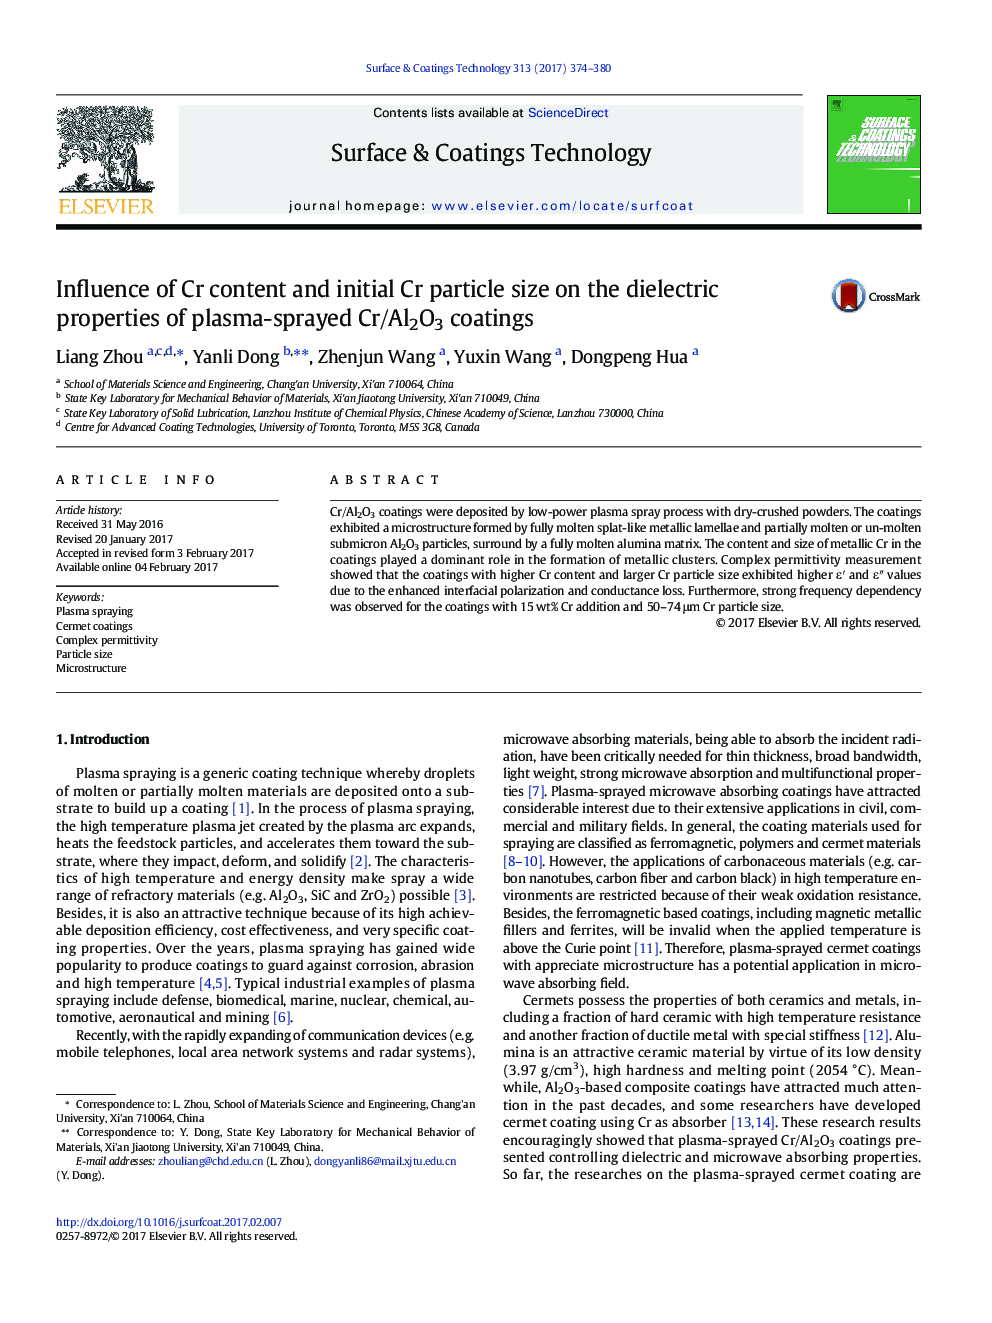 Influence of Cr content and initial Cr particle size on the dielectric properties of plasma-sprayed Cr/Al2O3 coatings